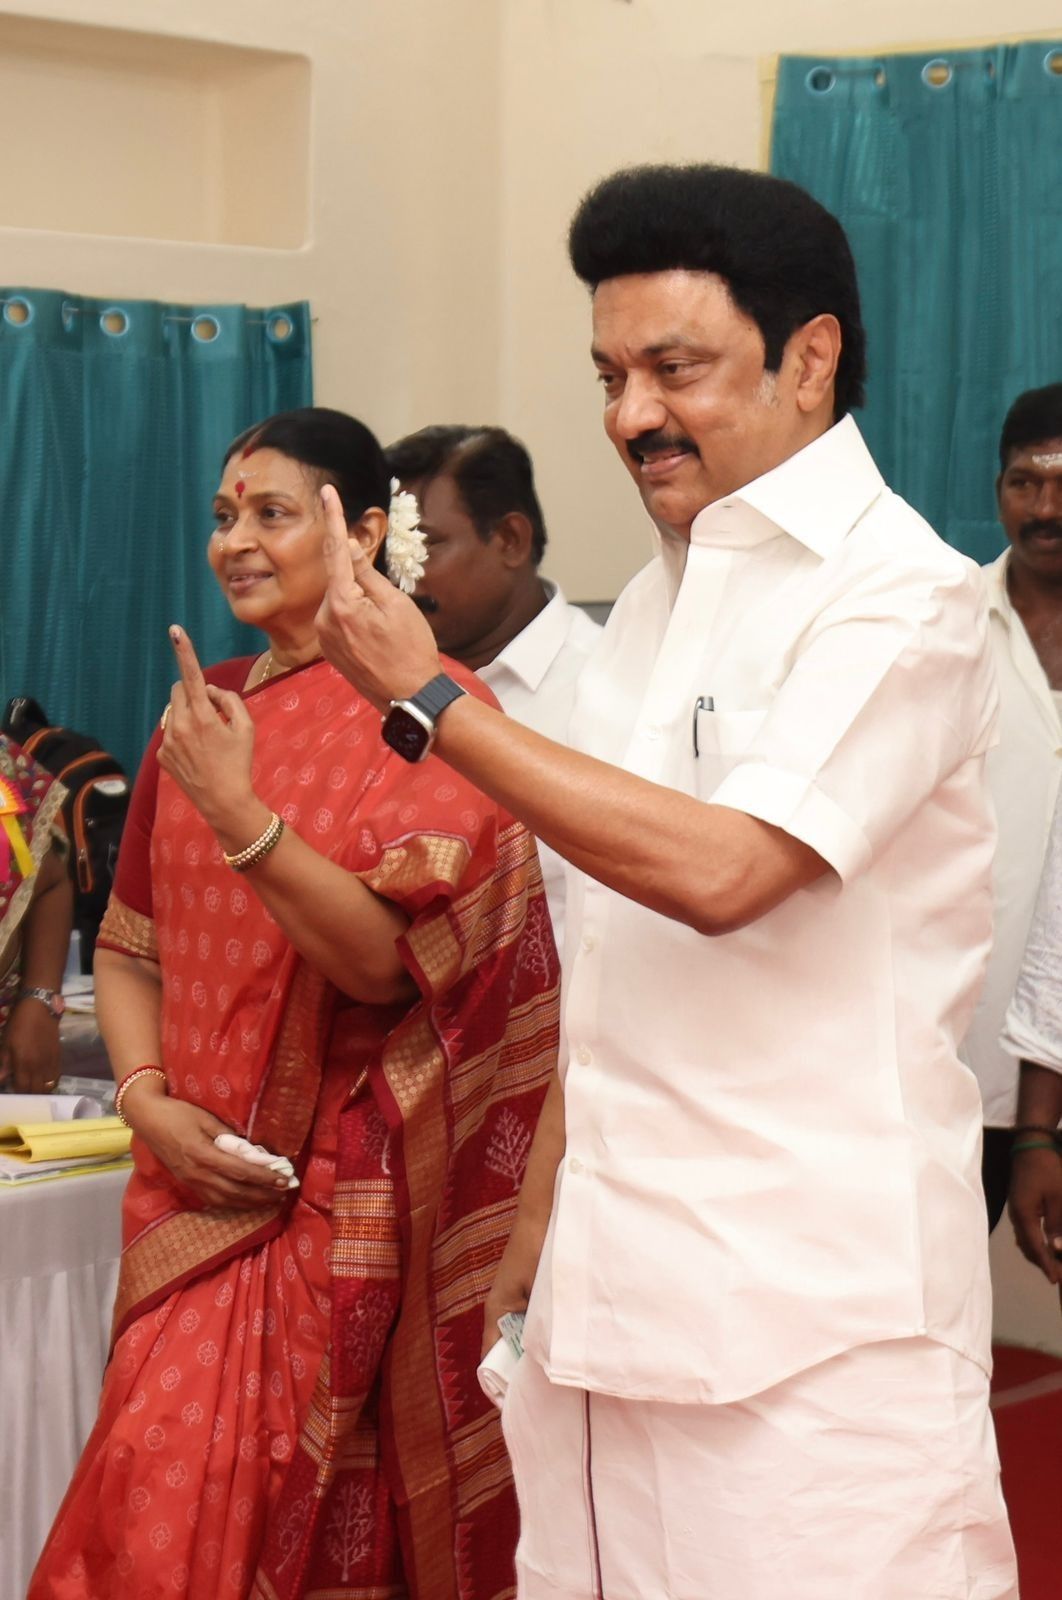 Chief Minister M. K. Stalin stood in line and voted